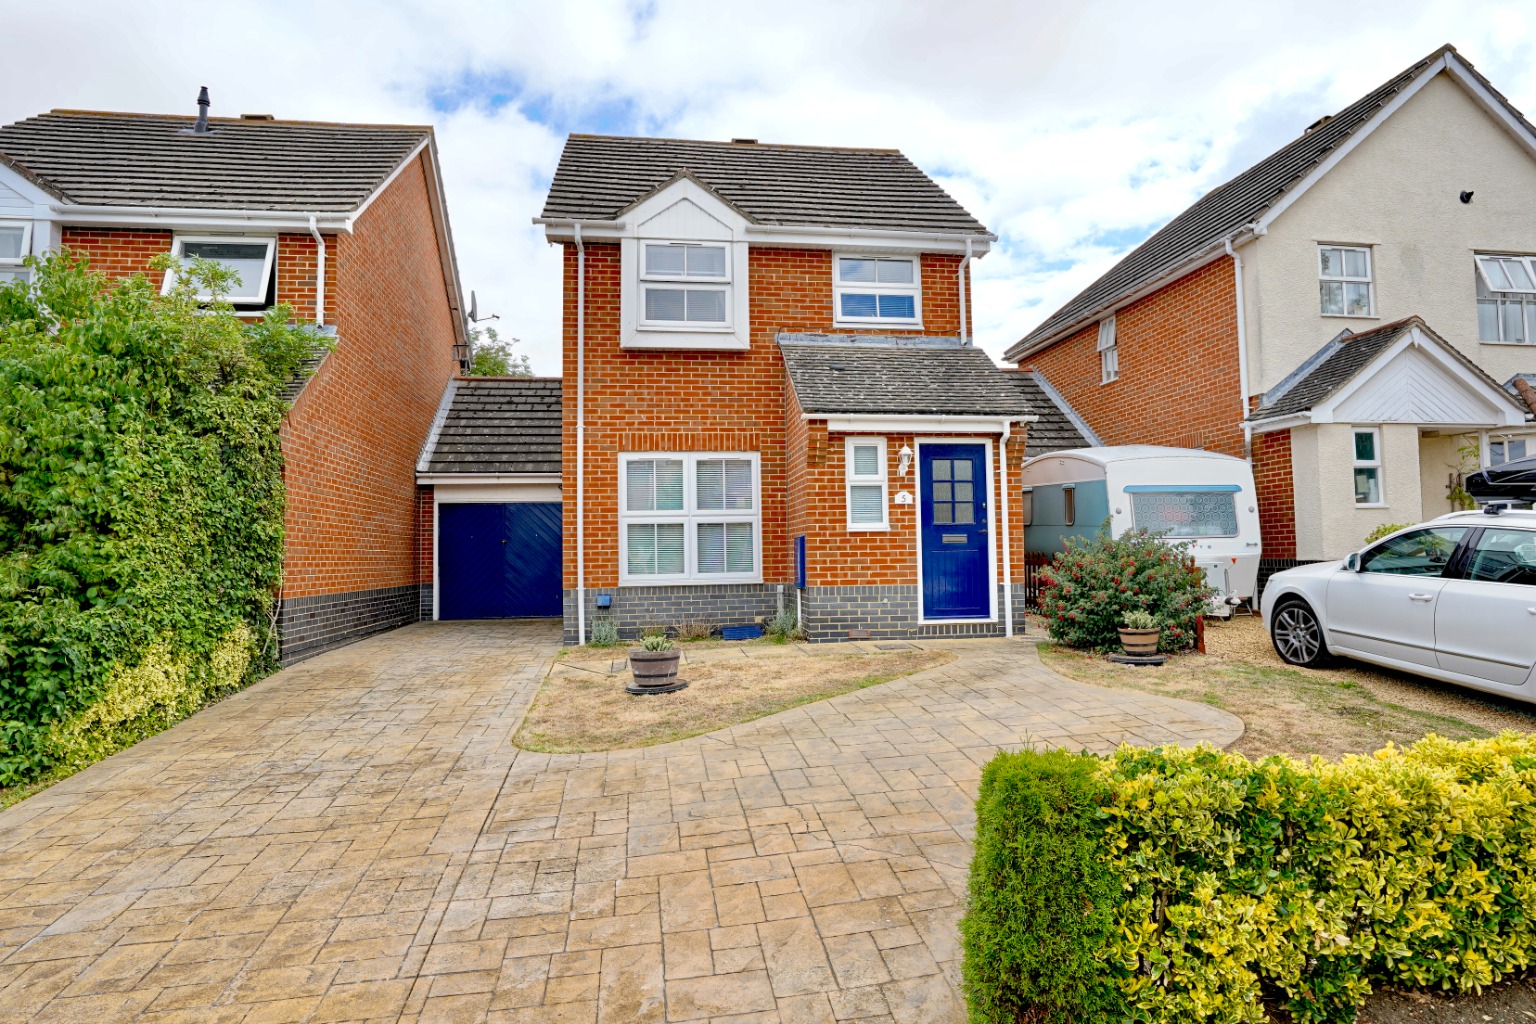 3 bed detached house for sale in Bishops Way, St. Neots, PE19